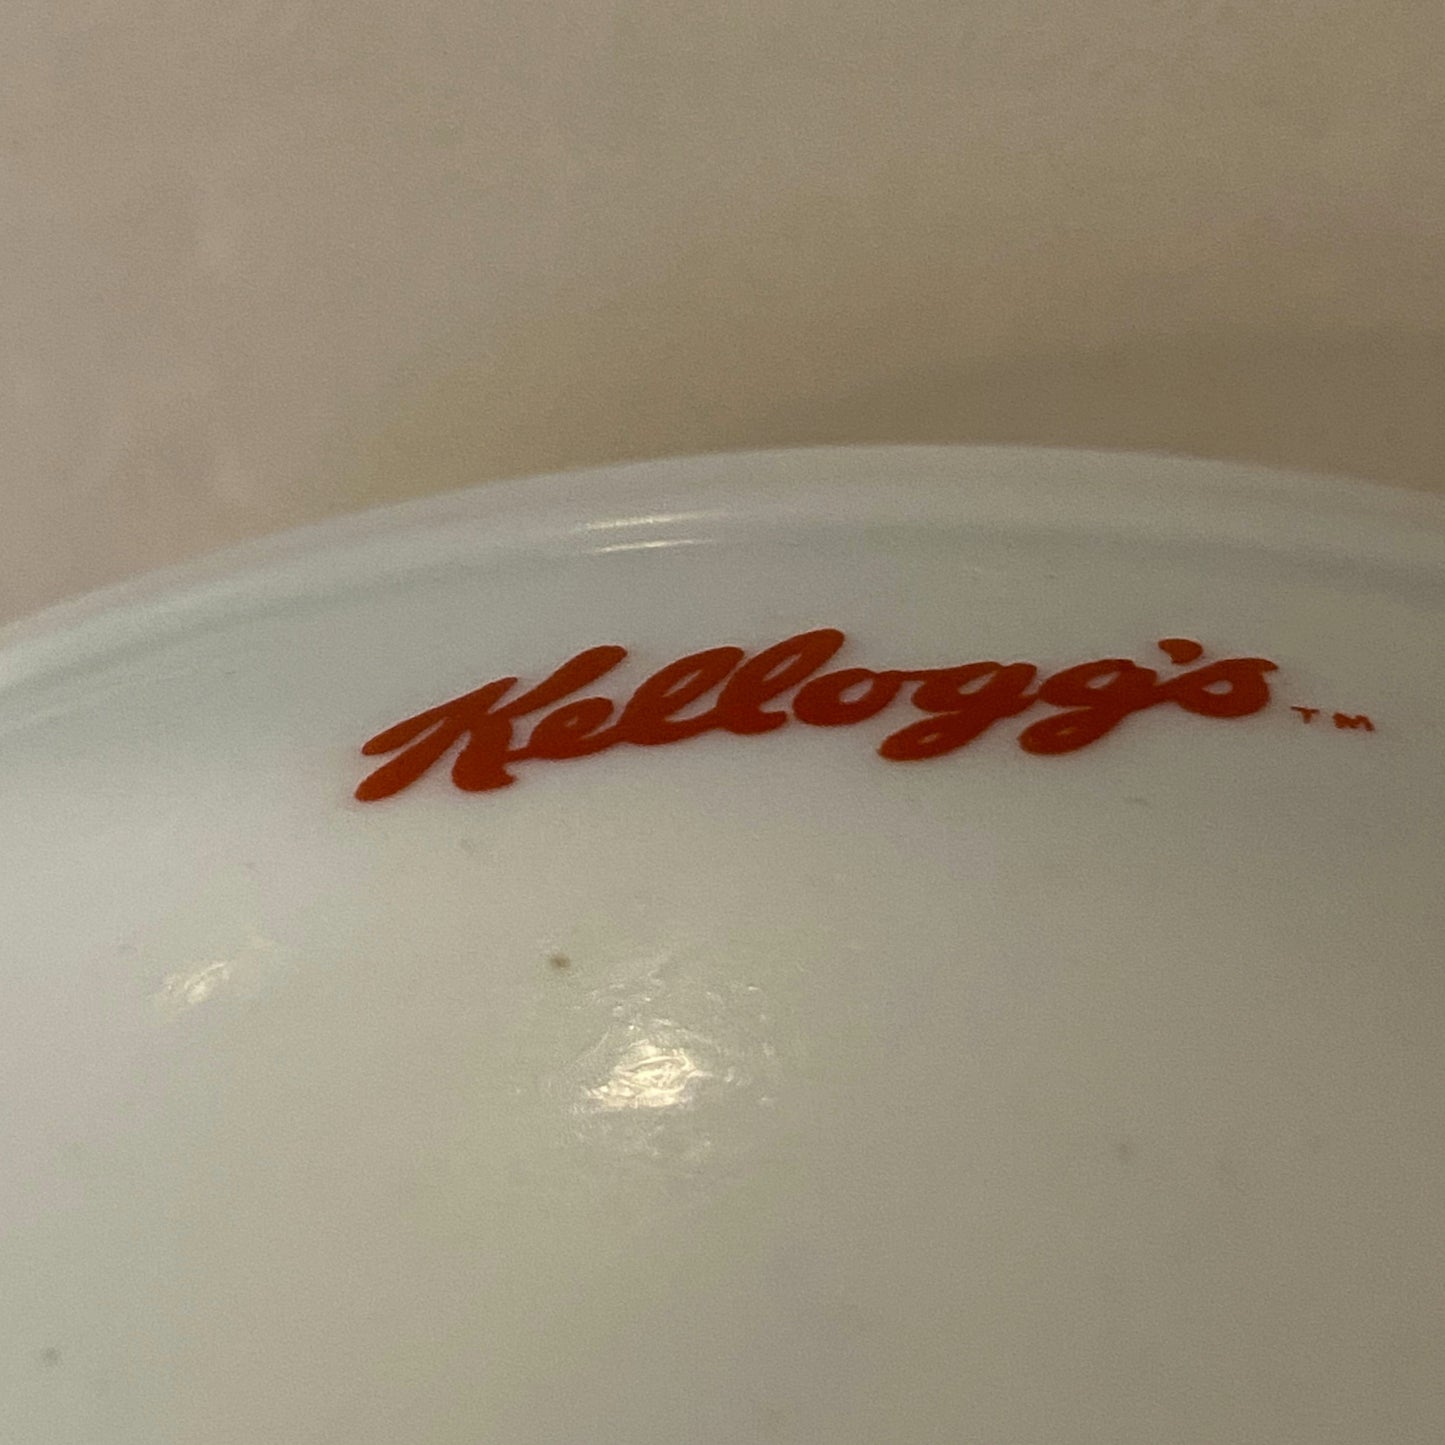 Tony the Tiger Cereal Bowl, 1999